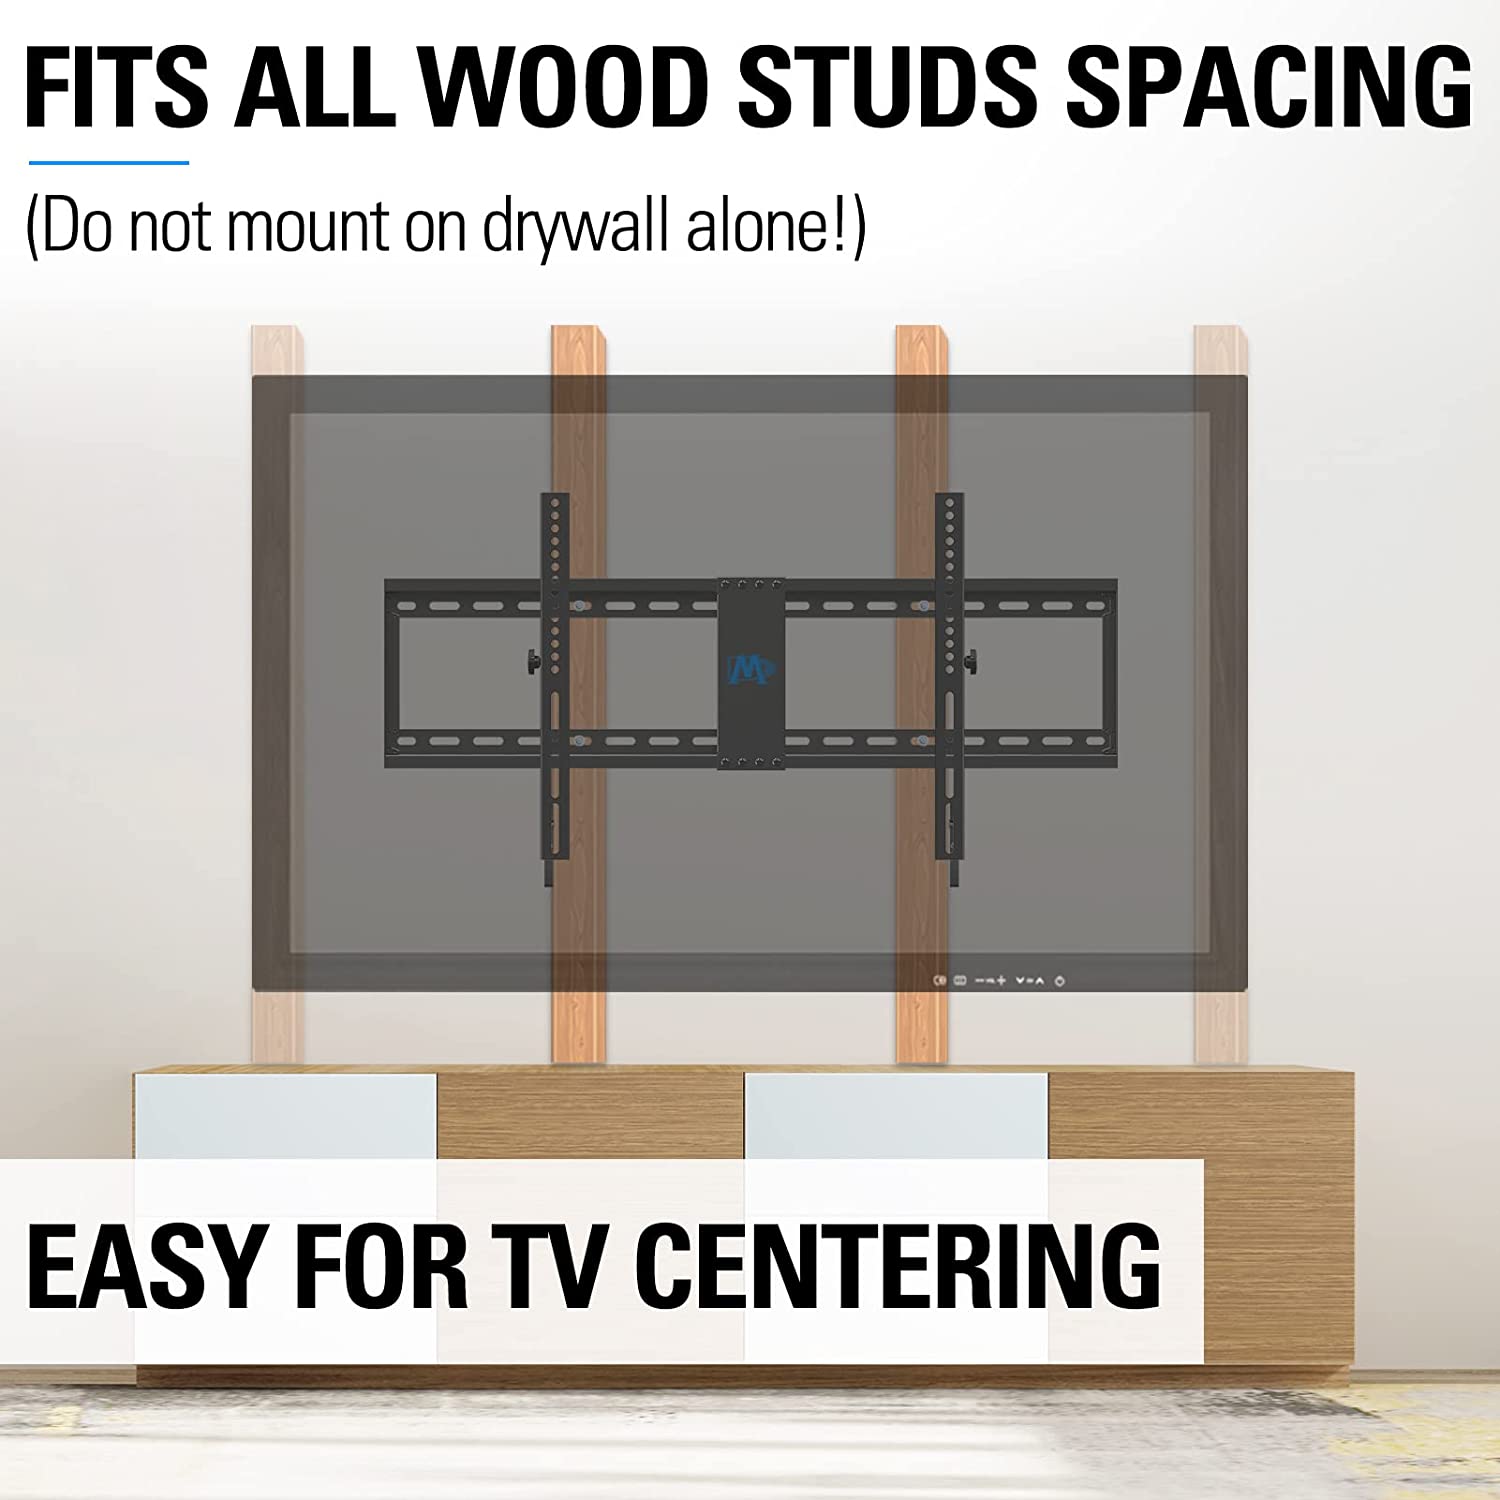 TV wall mount with 32'' wall plate for easy TV centering